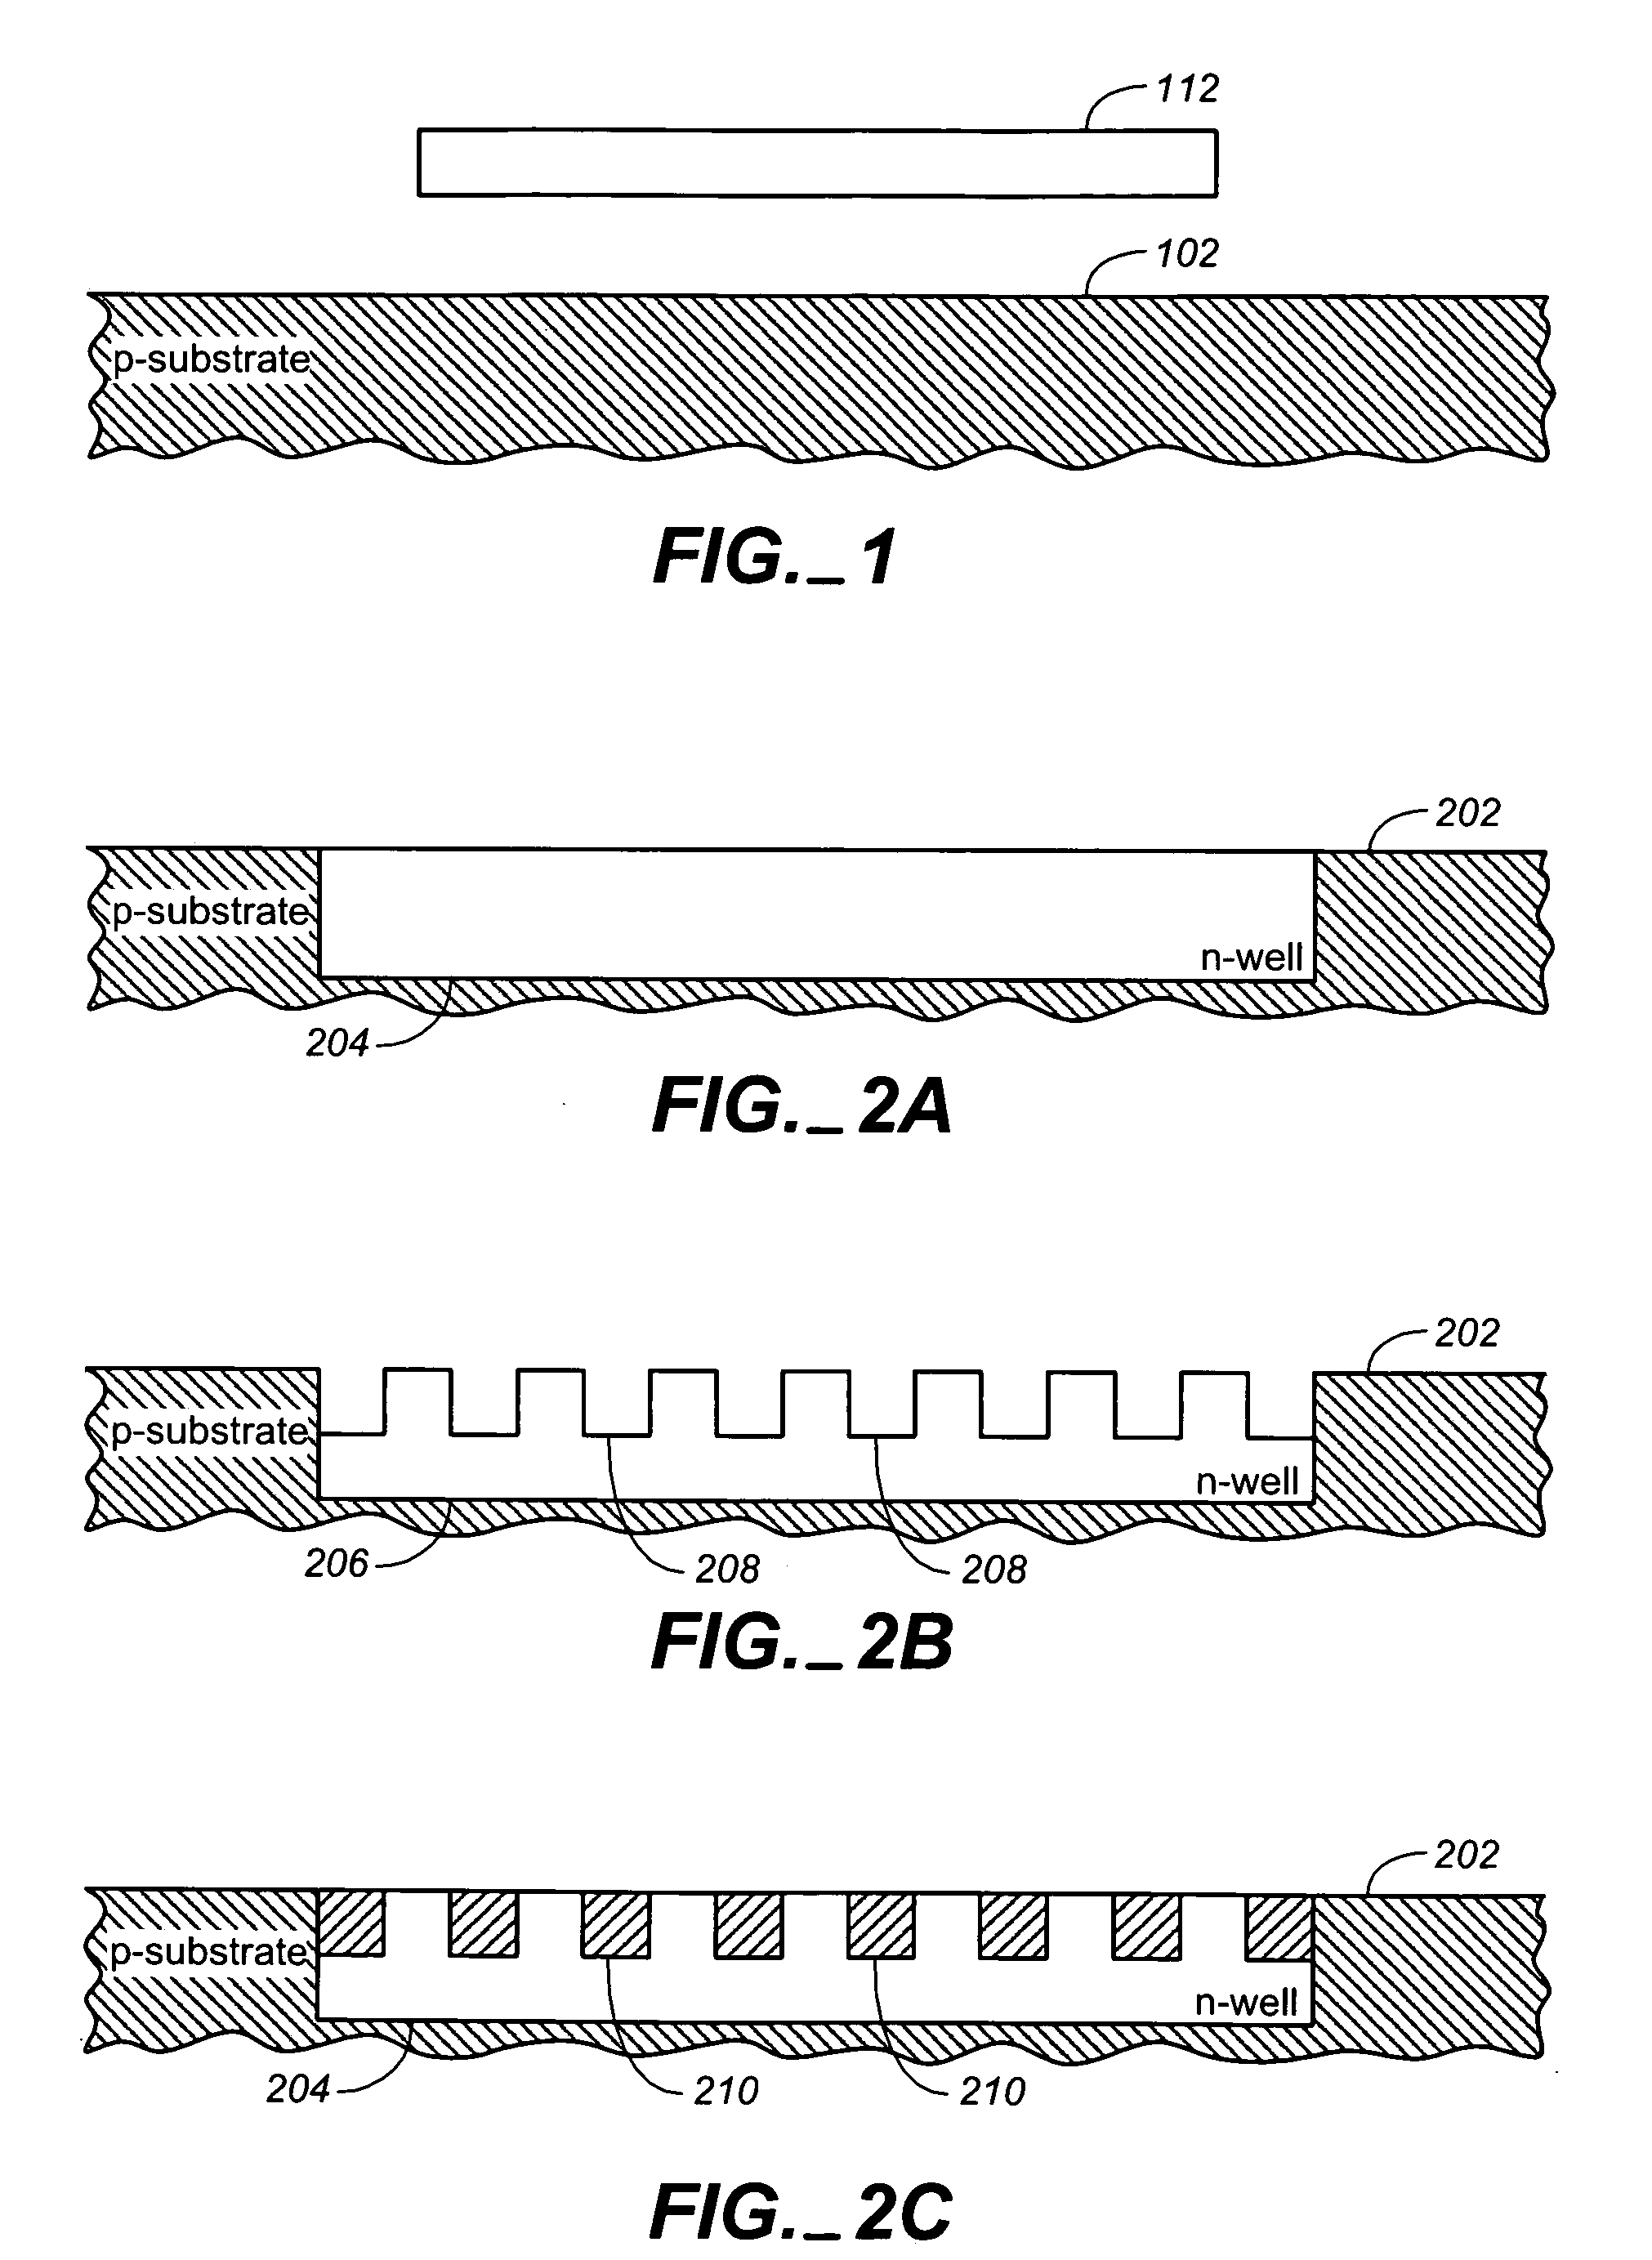 Technique and methodology to passivate inductively coupled surface currents